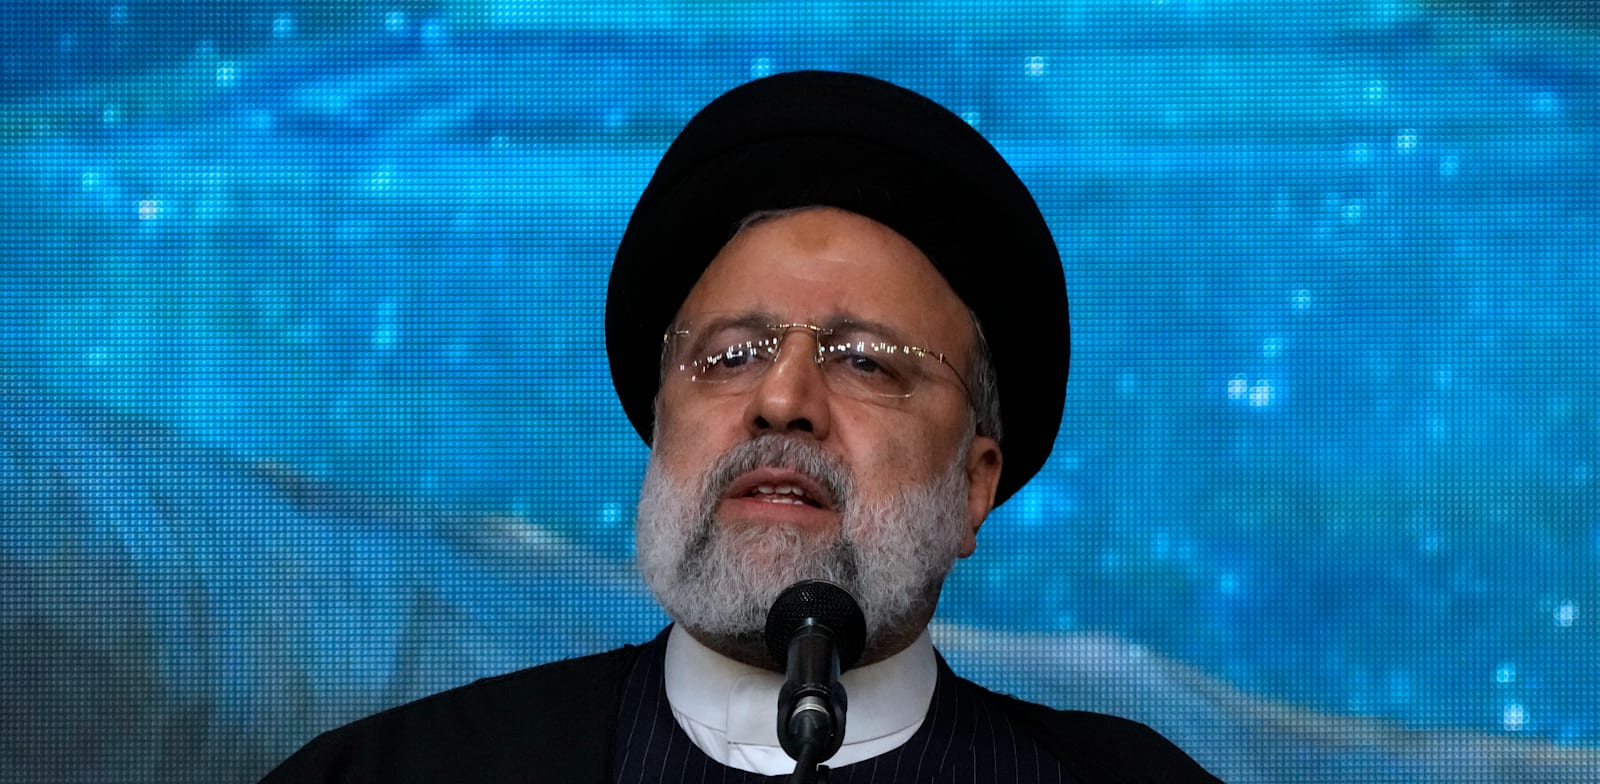 President of Iran dies in a helicopter crash, tragic loss of life